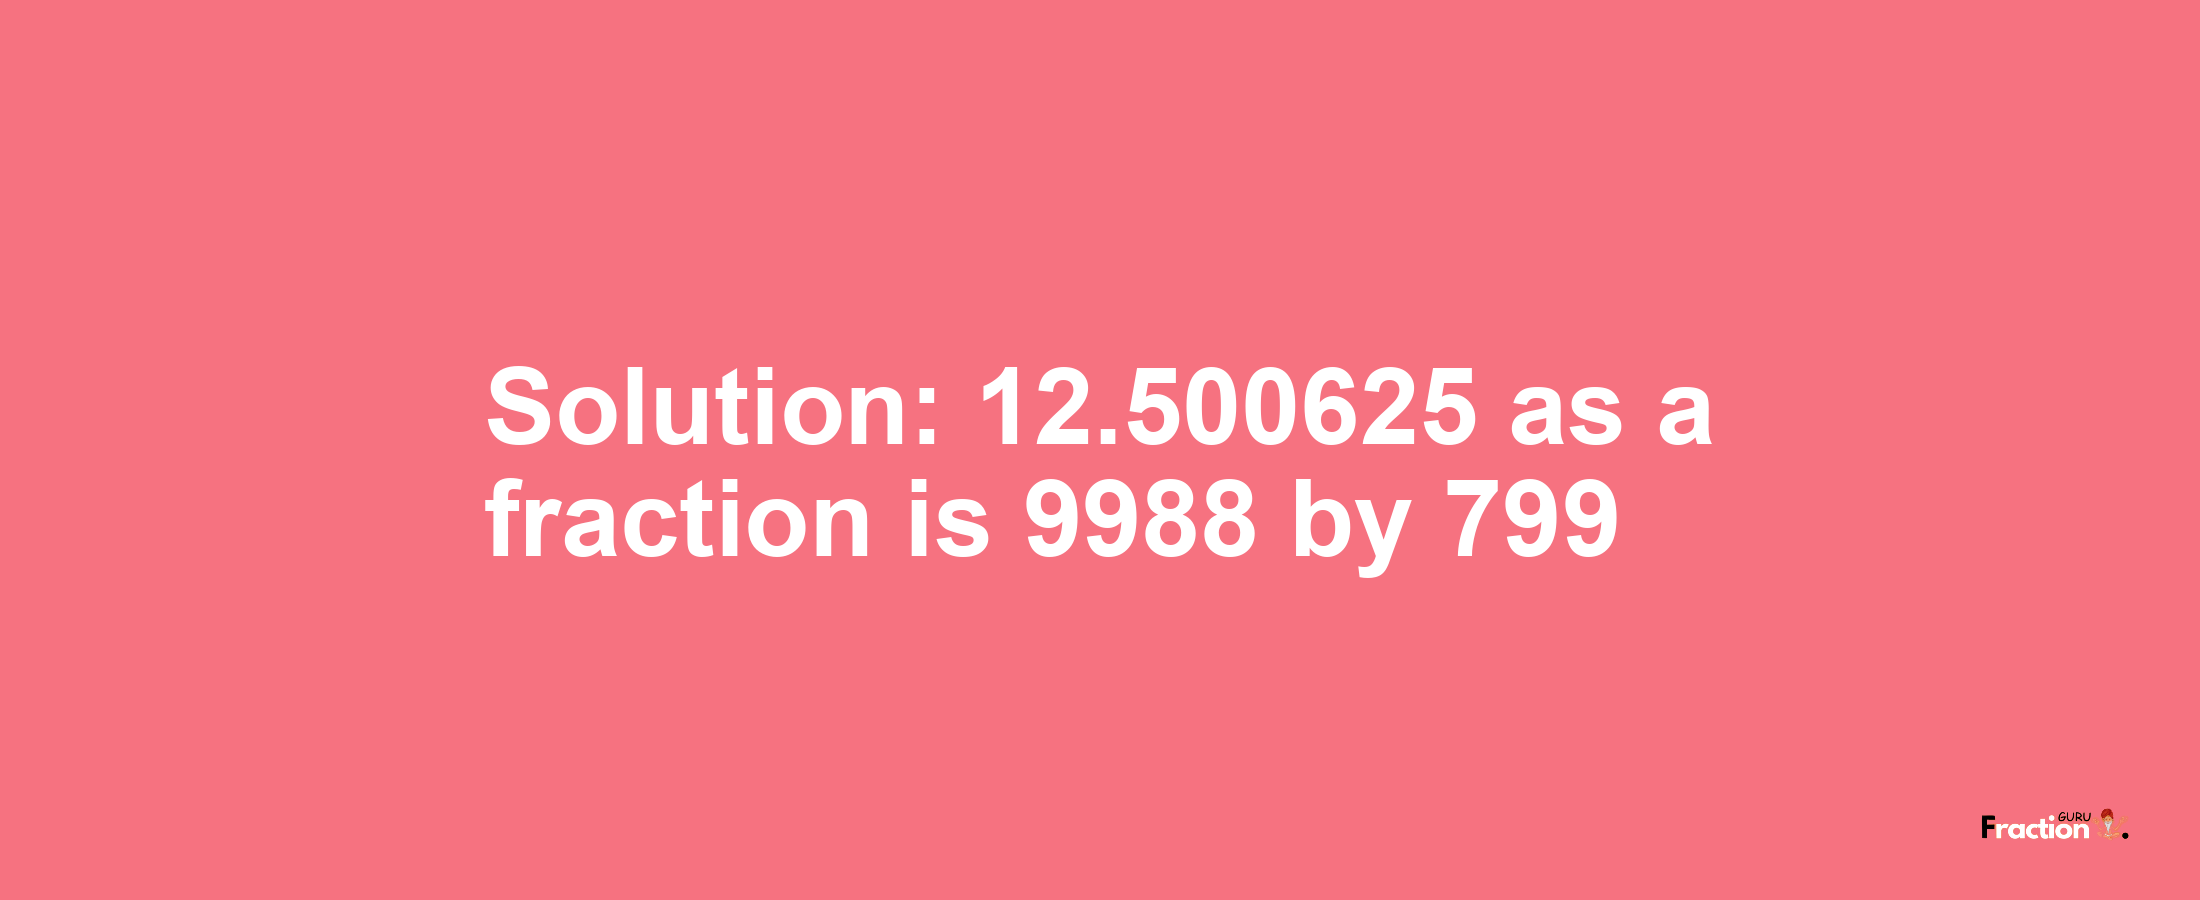 Solution:12.500625 as a fraction is 9988/799